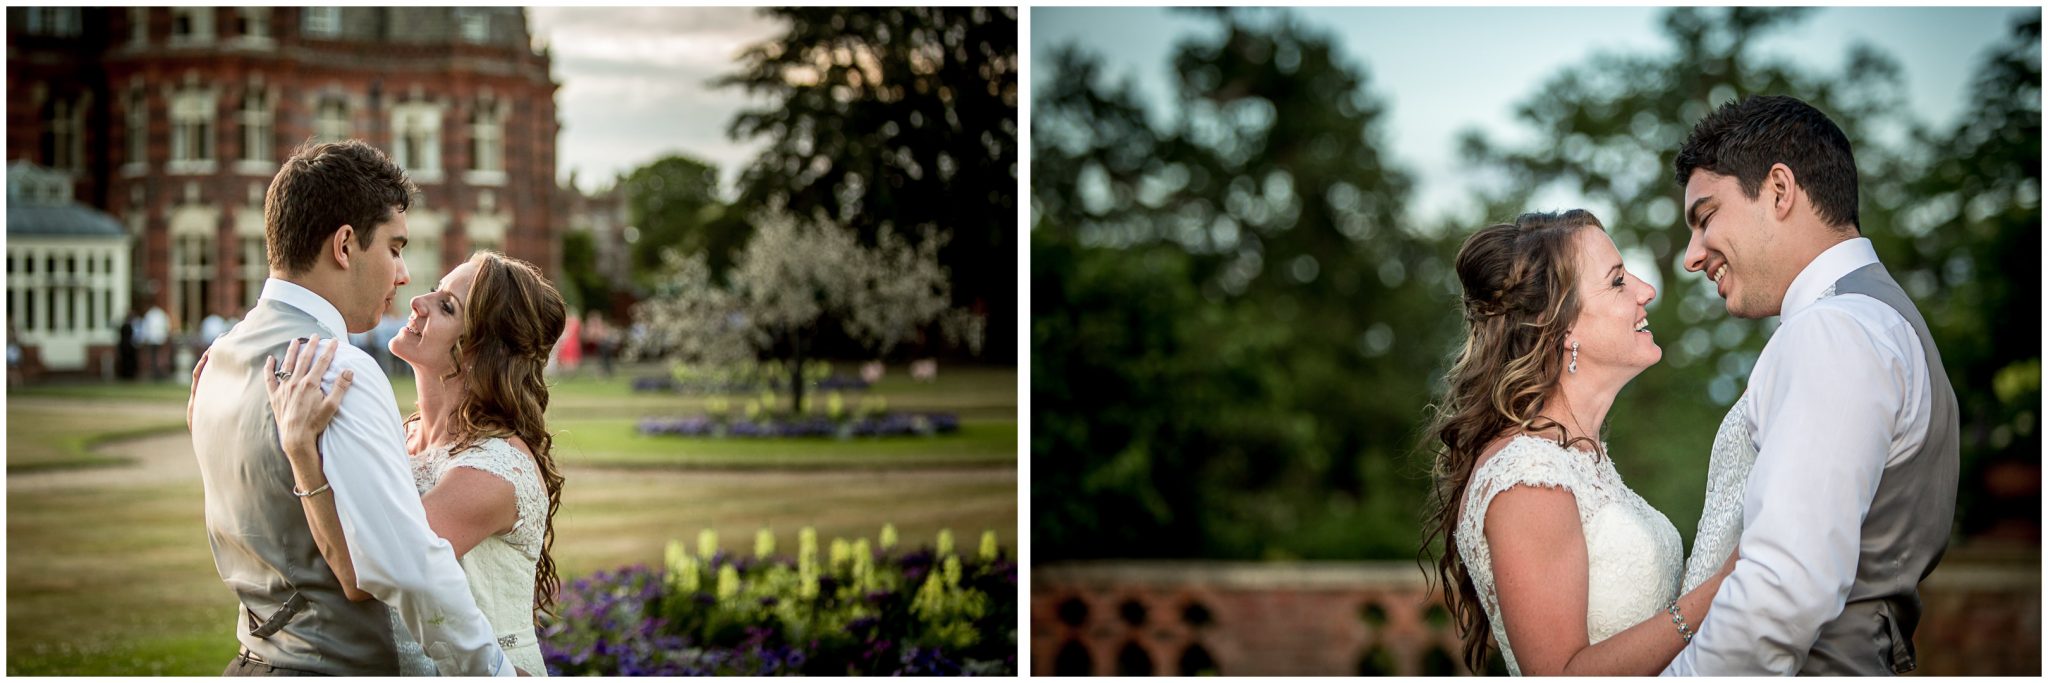 Couple portraits in the evening light in gardens of the Elvetham hotel